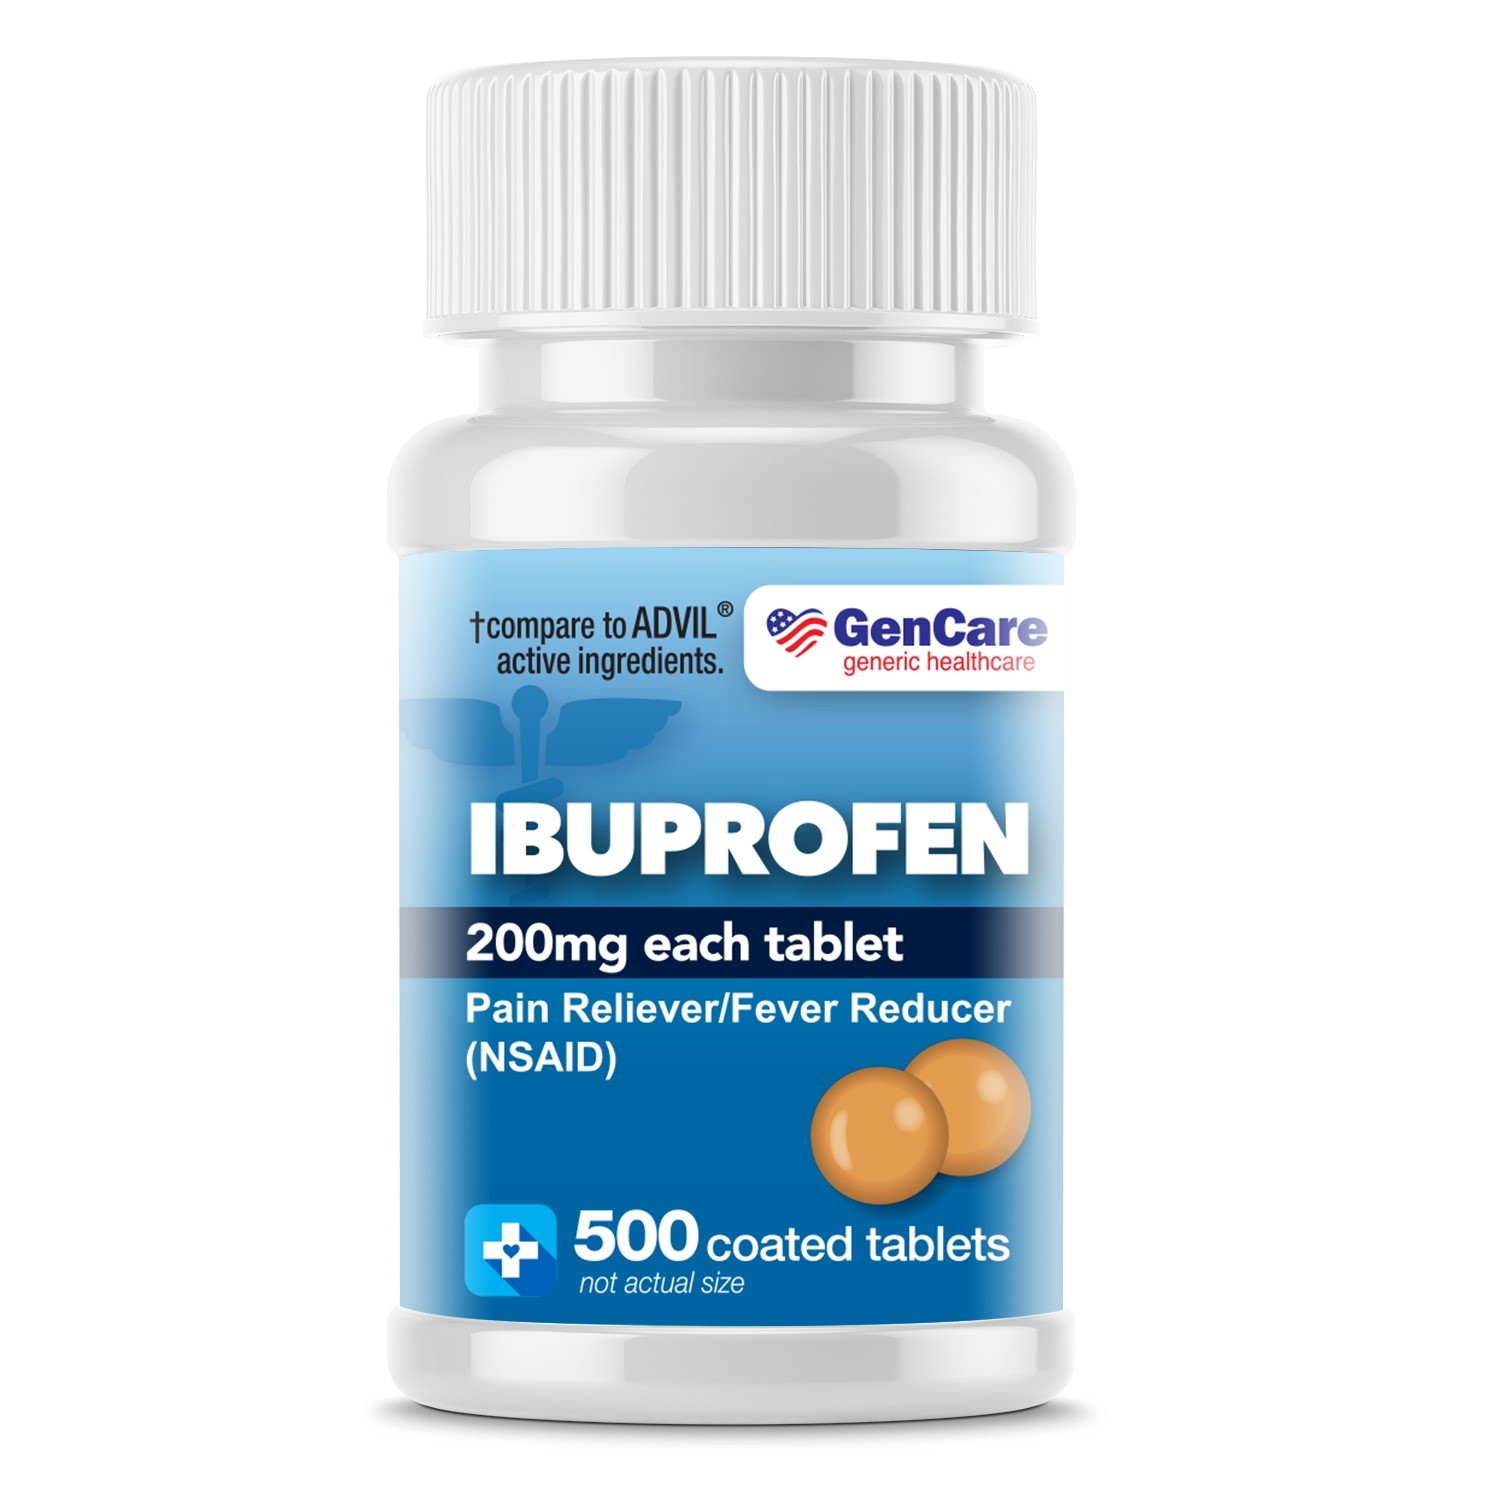 GenCare - Ibuprofen 200mg NSAID (500 Coated Tablets) | Pain Reliever Fever Reducer - image 5 of 5